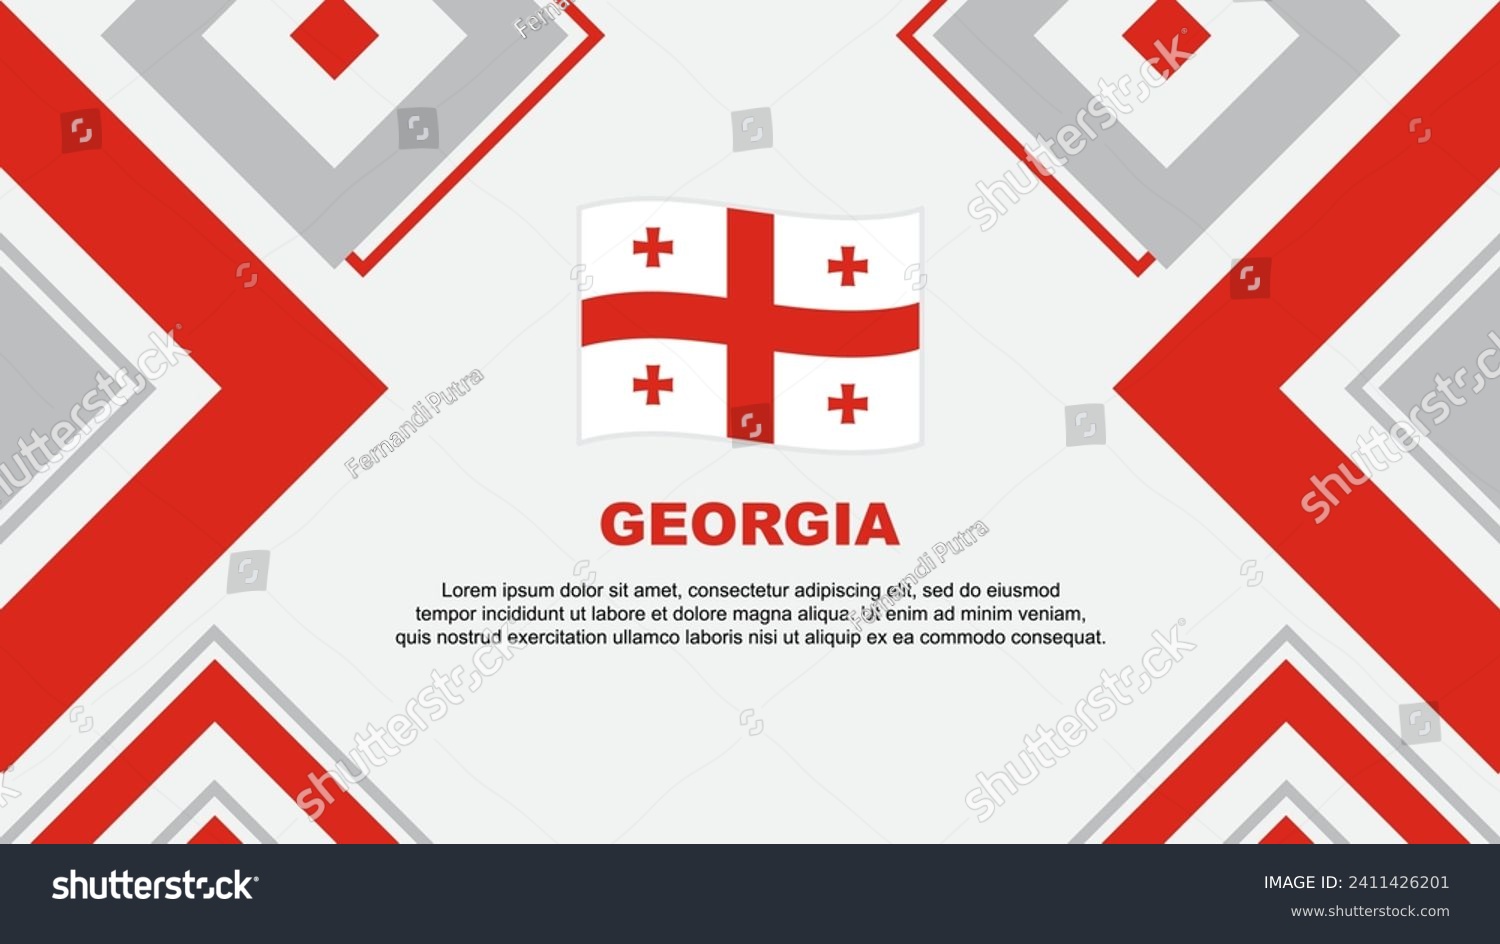 SVG of Georgia Flag Abstract Background Design Template. Georgia Independence Day Banner Wallpaper Vector Illustration. Georgia Independence Day svg